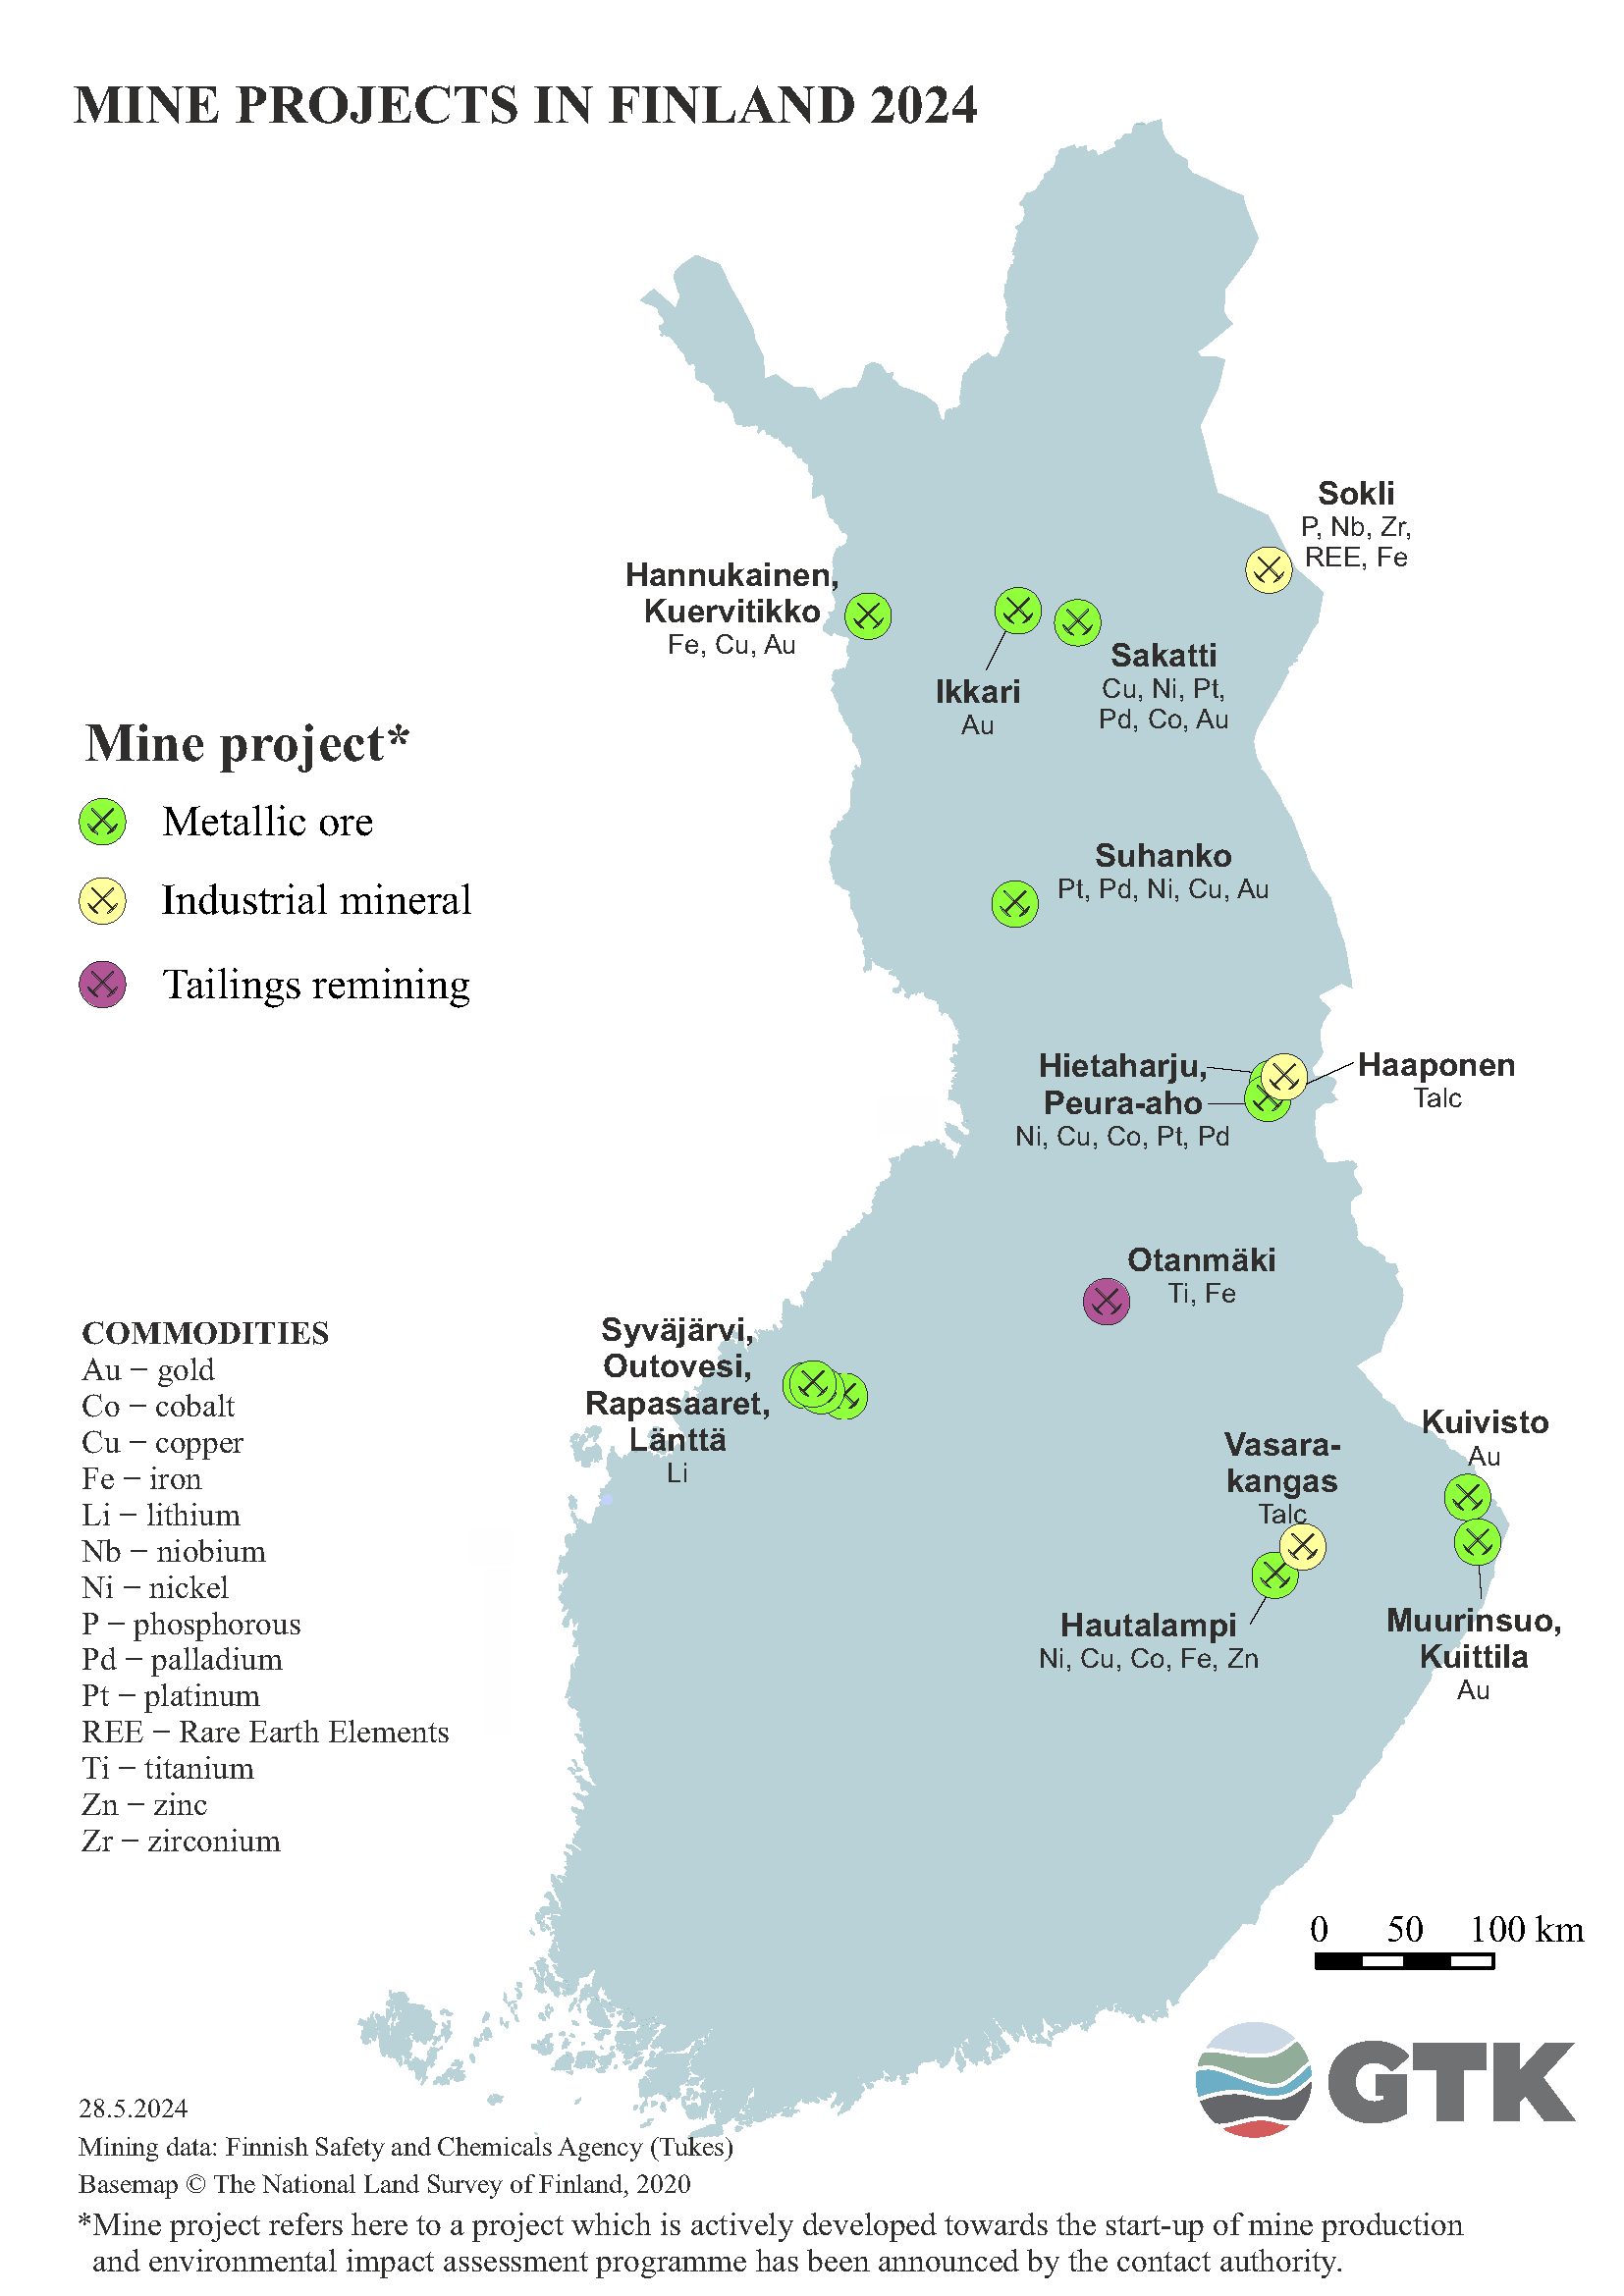 Mining projects on the map of Finland